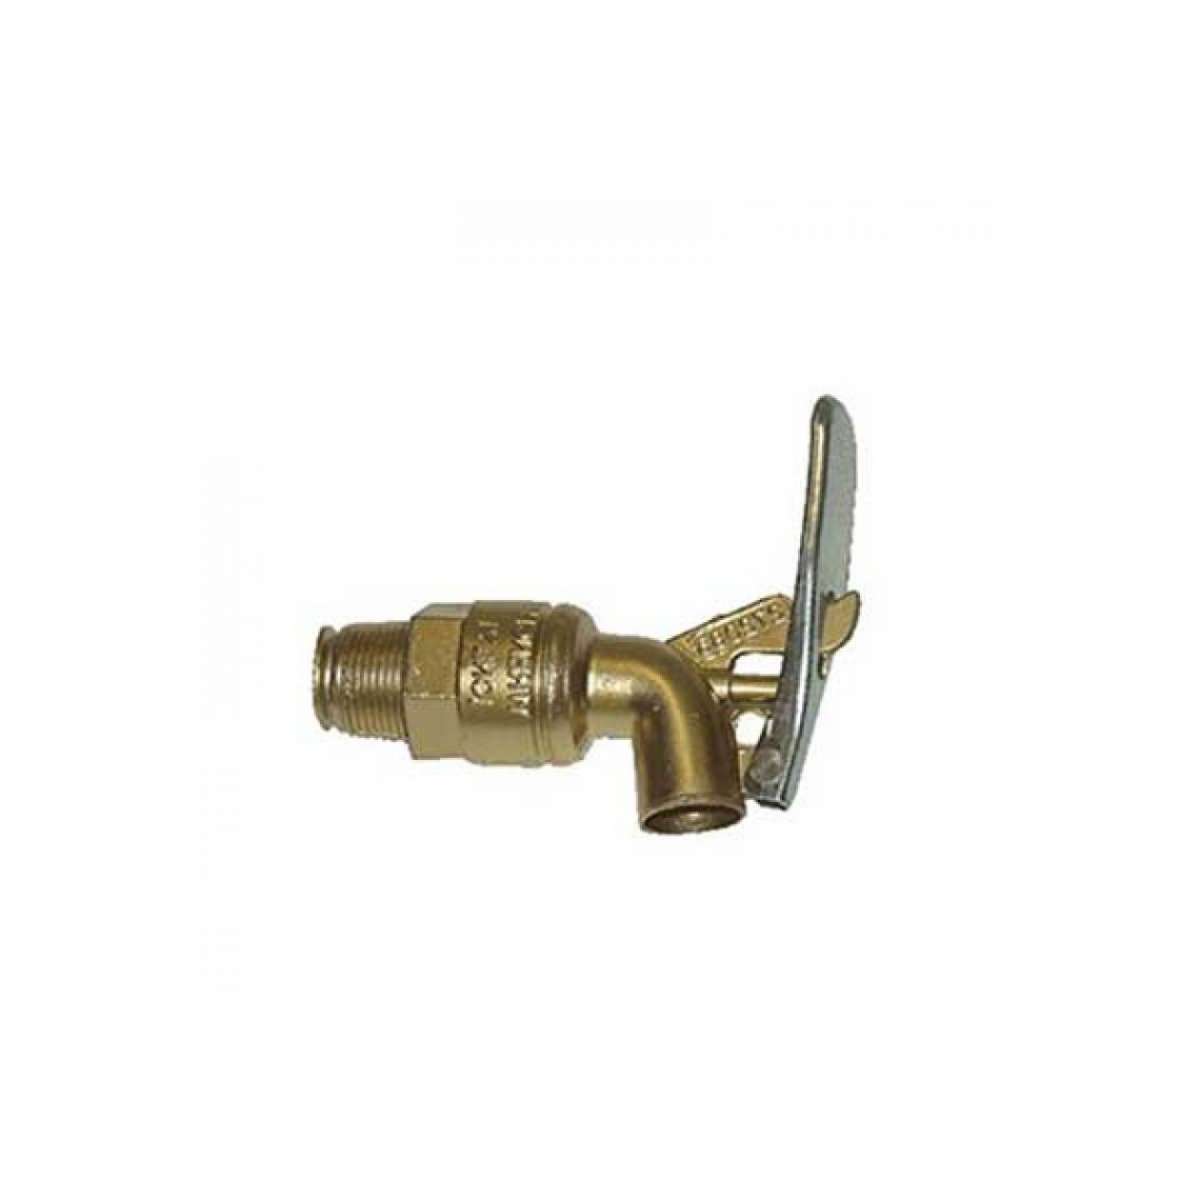 Spring Loaded Nozzle for Lubrigard POD System